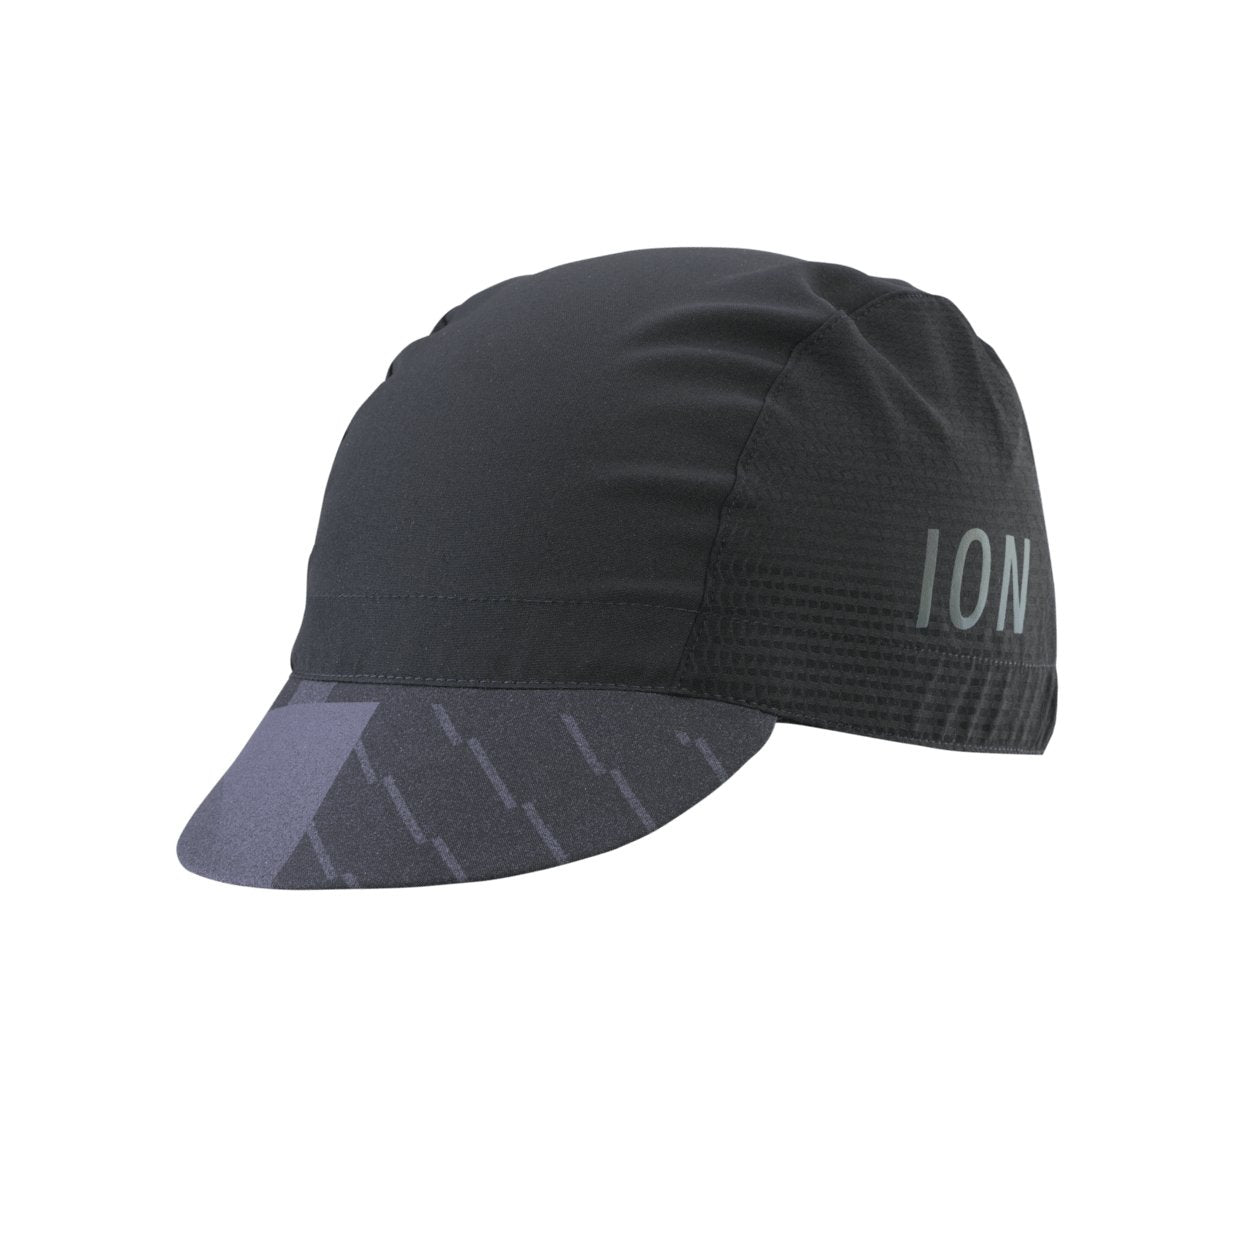 ION Cap VNTR 2024 - Worthing Watersports - 9010583105826 - Apparel - ION Bike